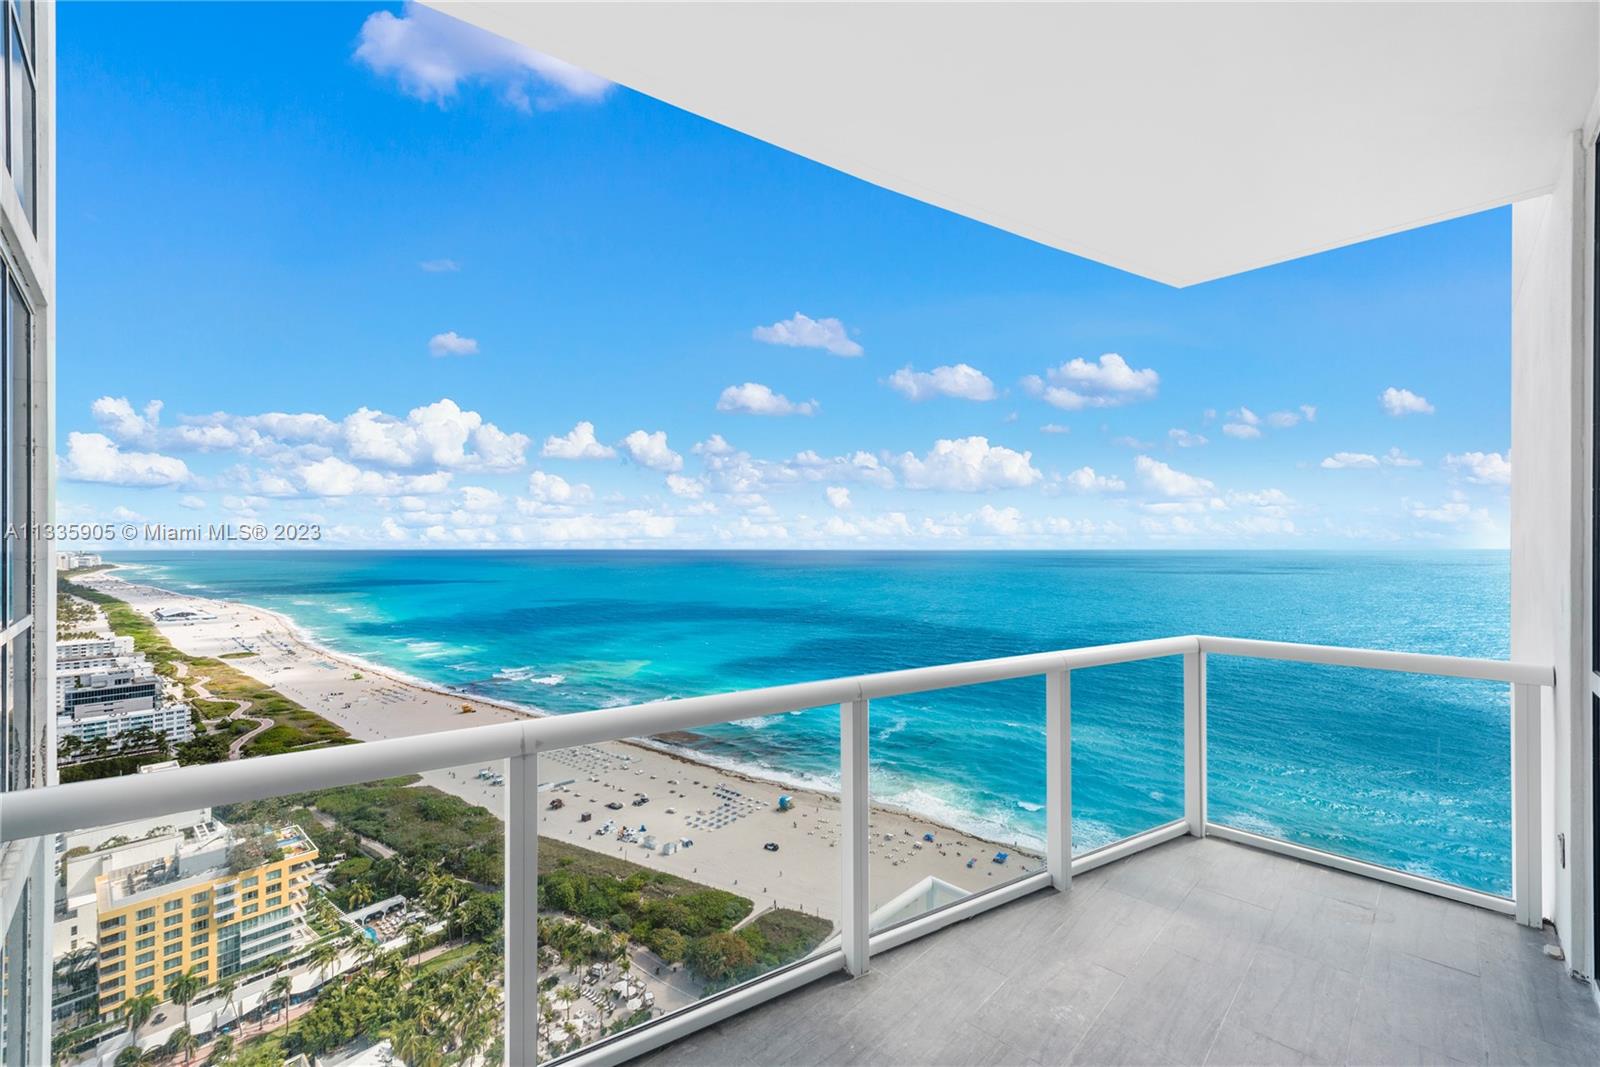 Overlooking the prized sands of South of Fifth,  #3401 welcomes you home to endless ocean views and the desirable coastline.  Settle into true bliss as you embrace life at its finest right here atop the warm Floridian sunshine framed by glossy shoreline waterscapes. A private elevator foyer opens to 3,000 sqft 3 bed + den layout with glass walls highlighting the sensational vistas. Singular opportunity to tailor your beachfront jewel in the coveted Continuum, which sets the standard in 5star luxury resort living. Continuum 12 acres boast, private beach club, three tennis courts, two pools, outdoor restaurant, gym, spa, concierge, more. #3401 is ready to welcome you to oceanfront paradise – all just steps away from world-class dining, shopping & entertainment options for utmost convenience!